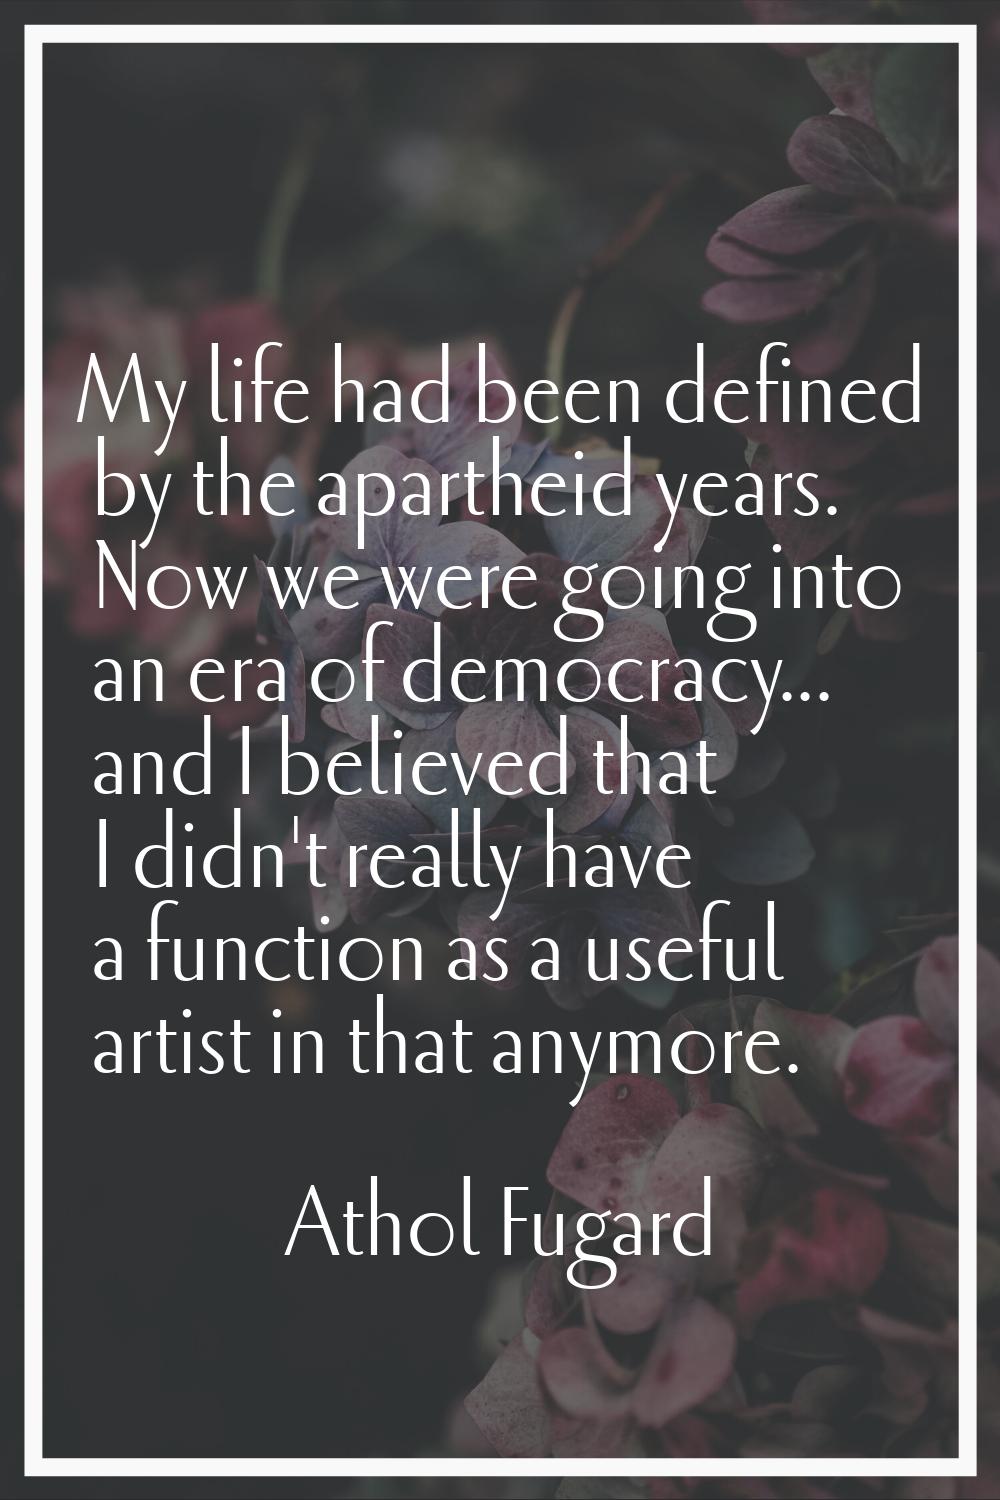 My life had been defined by the apartheid years. Now we were going into an era of democracy... and 